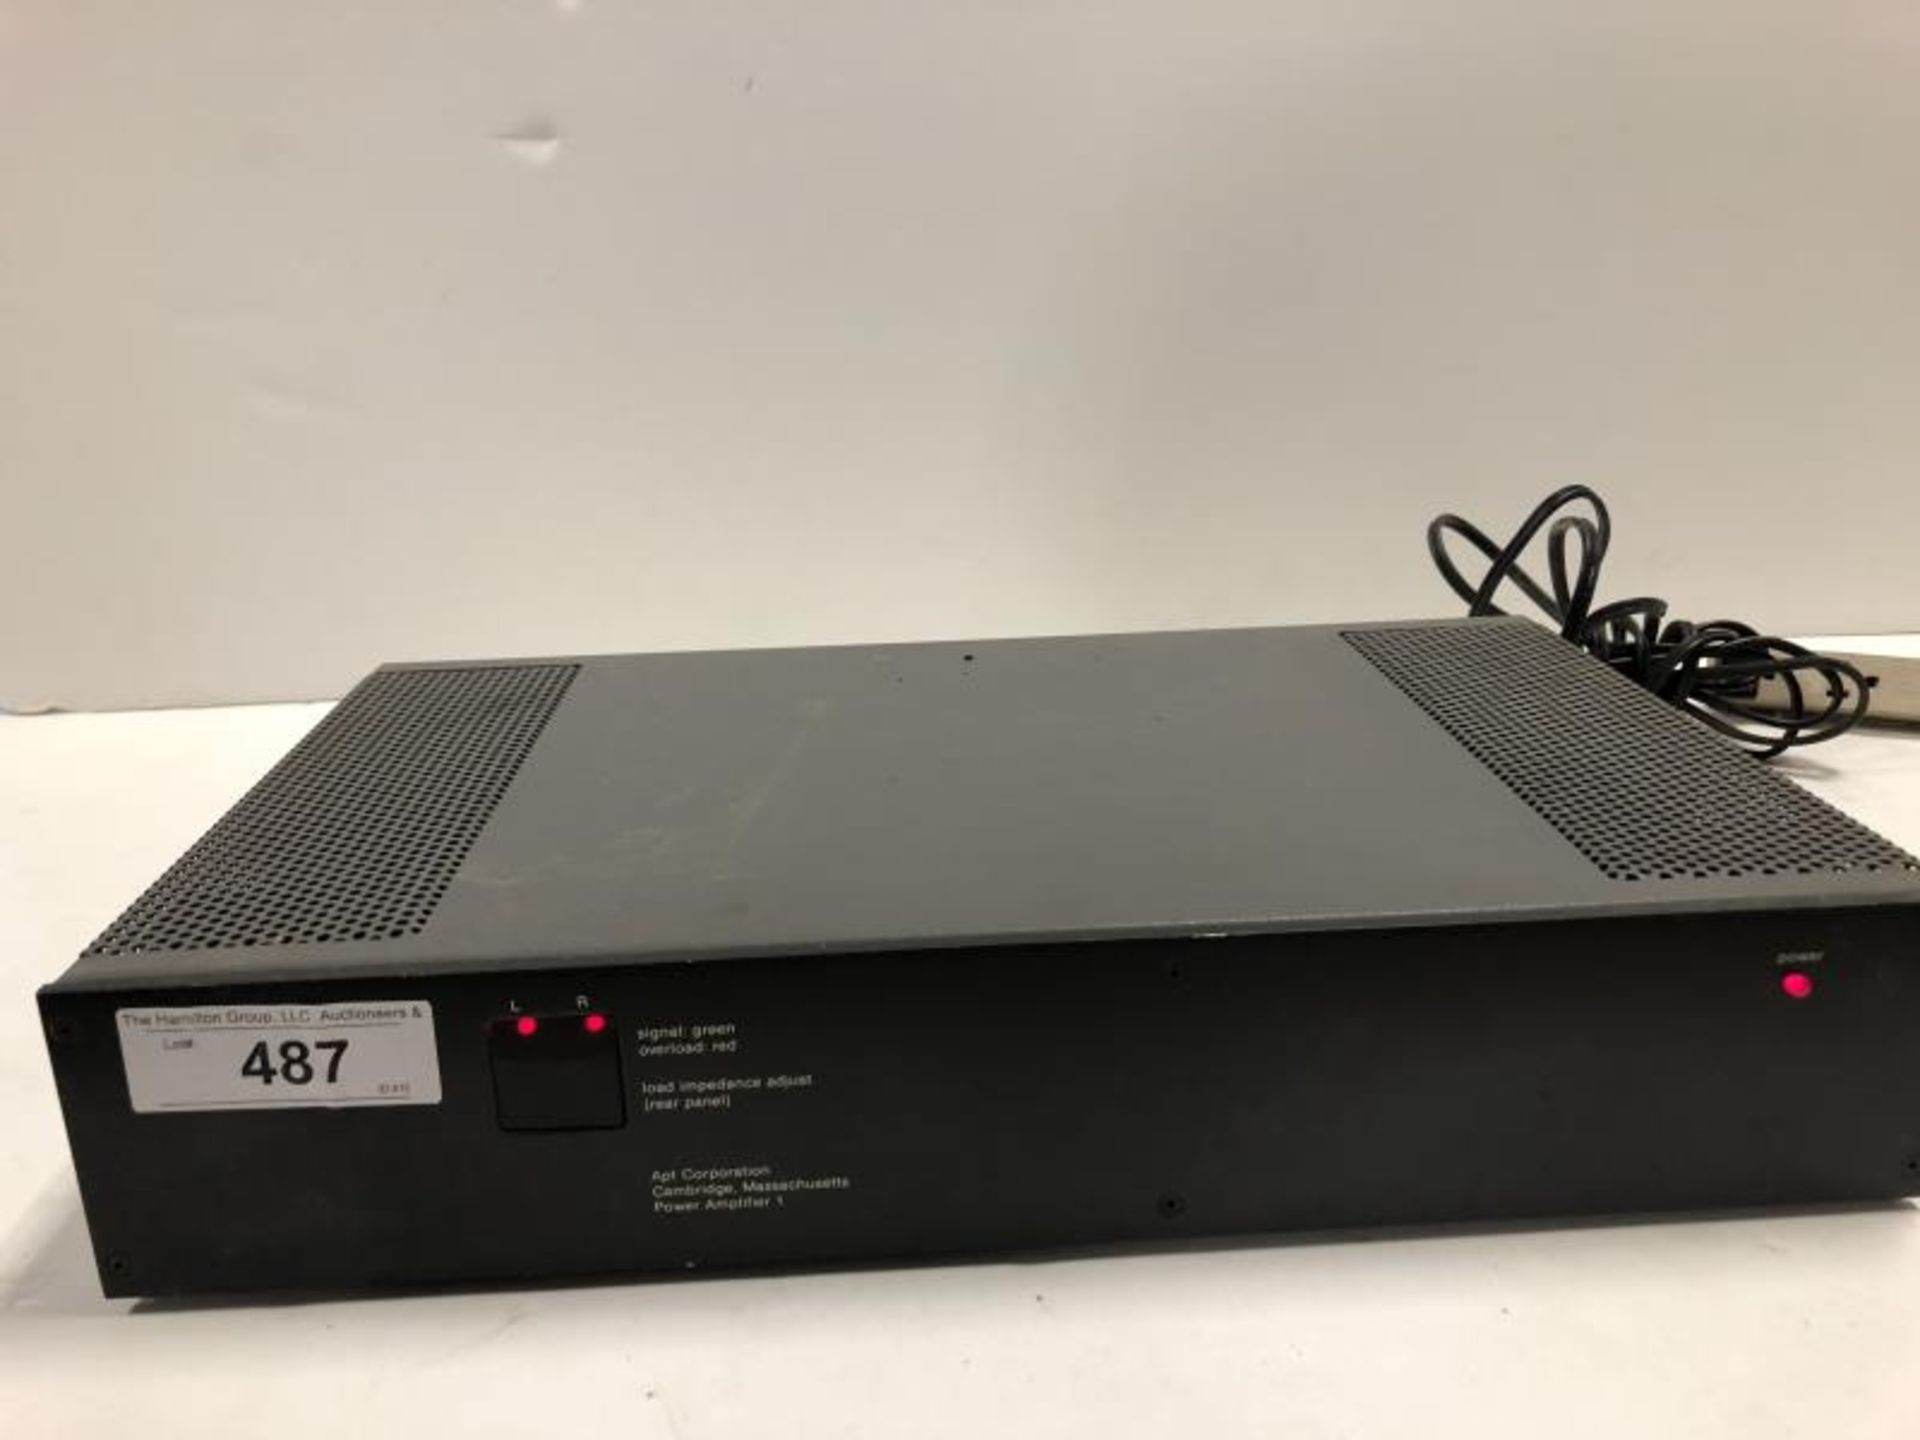 Apt Corp Power Amp 1, tested - powers up